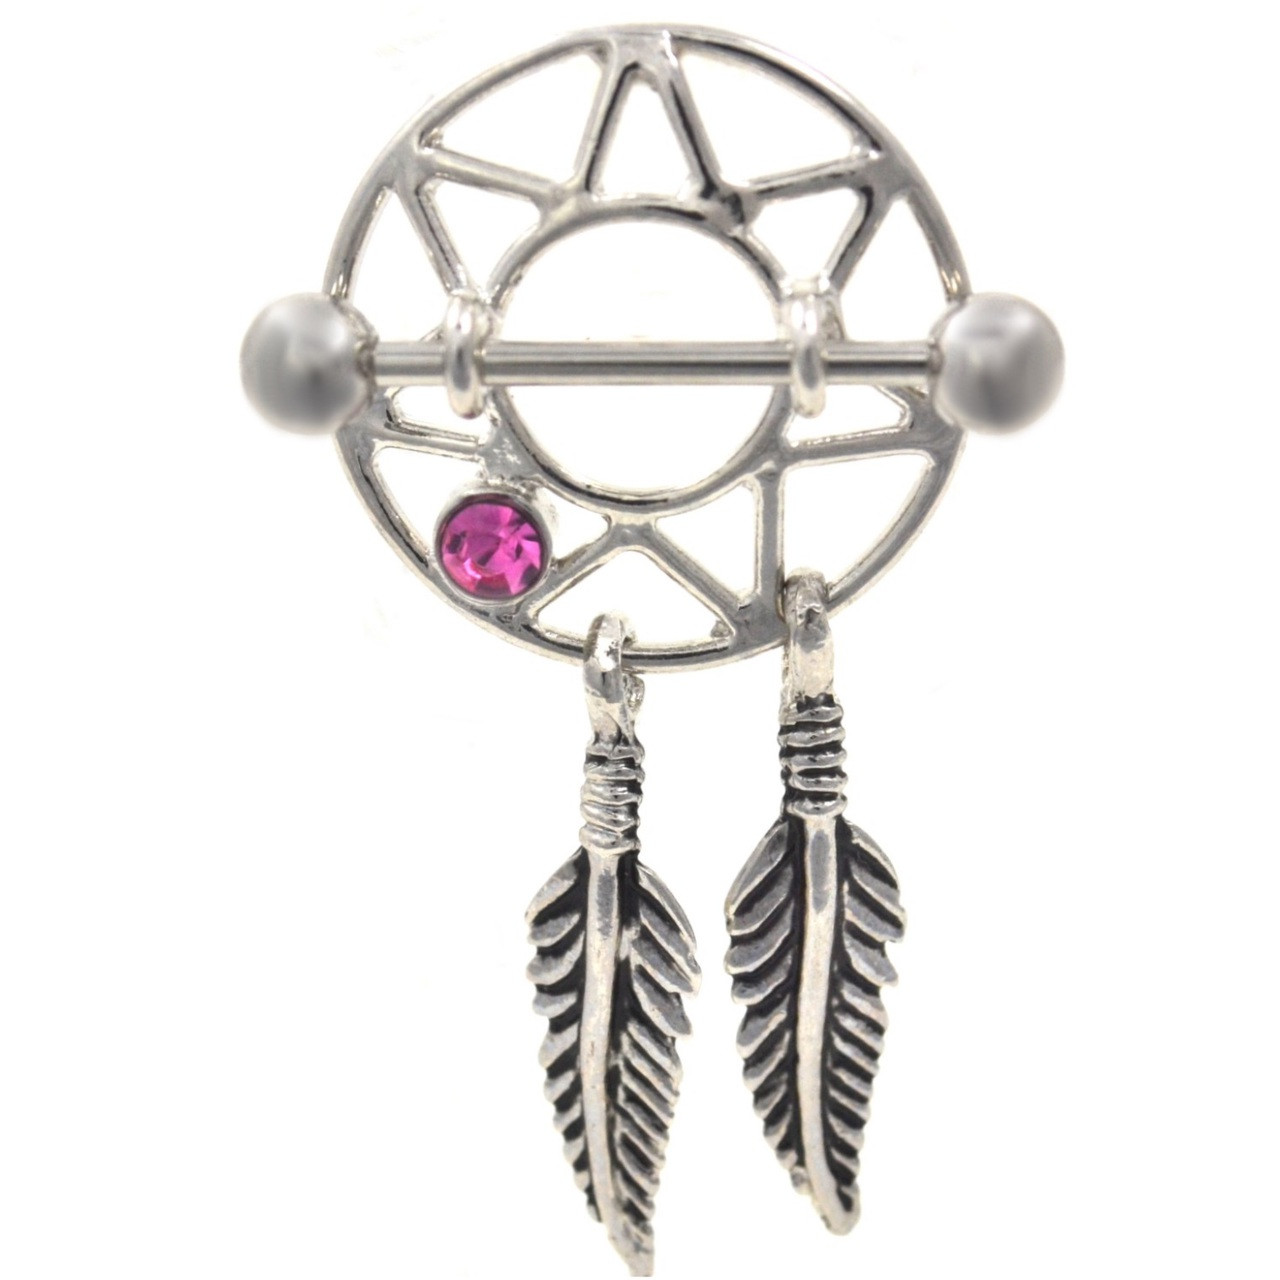 A Pair of Classic Dreamcatcher Feather Nipple Shield Ring